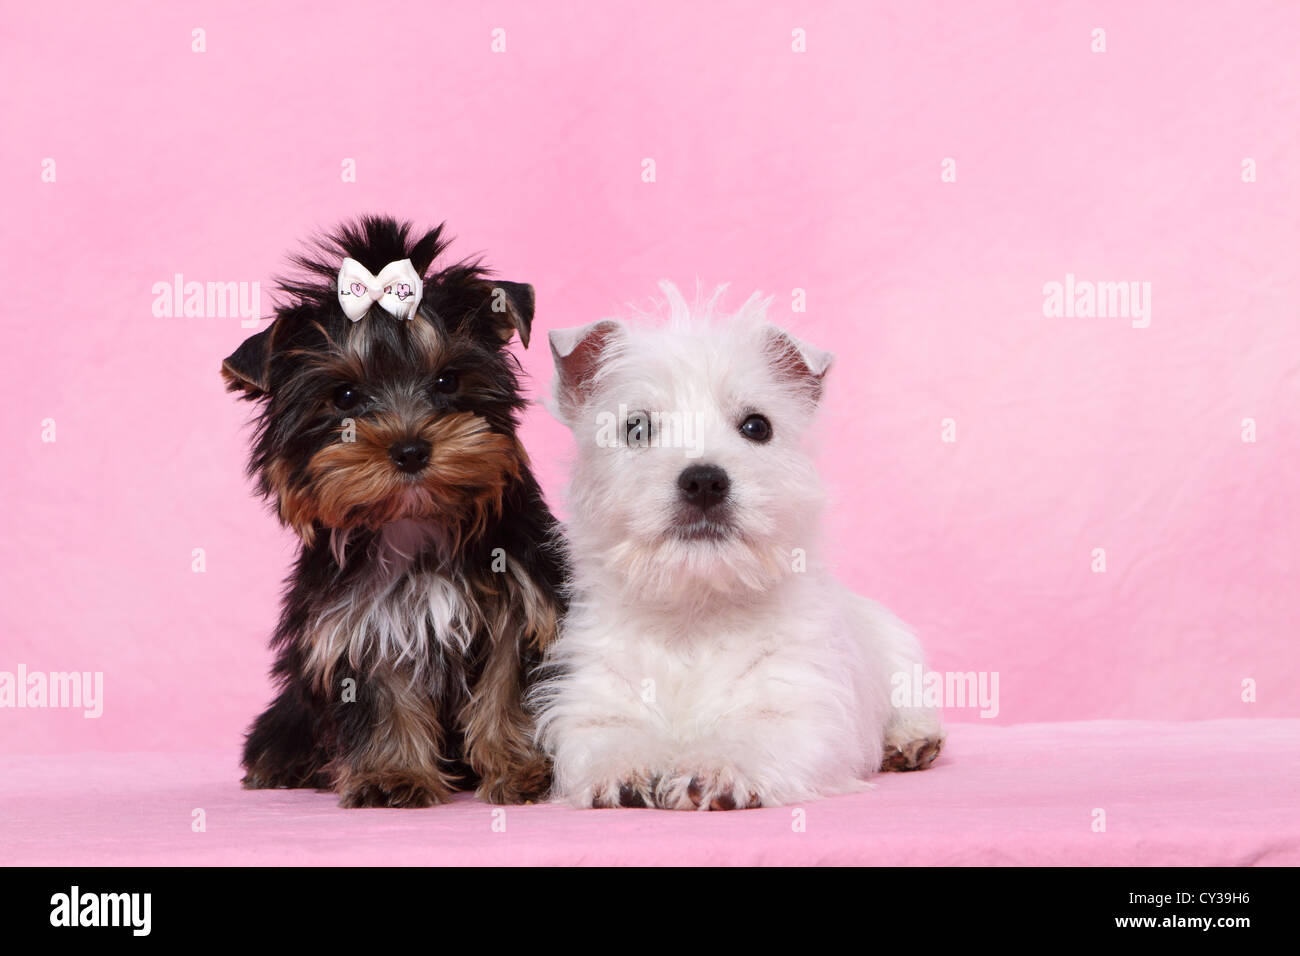 West Highland White Terrier and Yorkshire Terrier Puppy Stock Photo